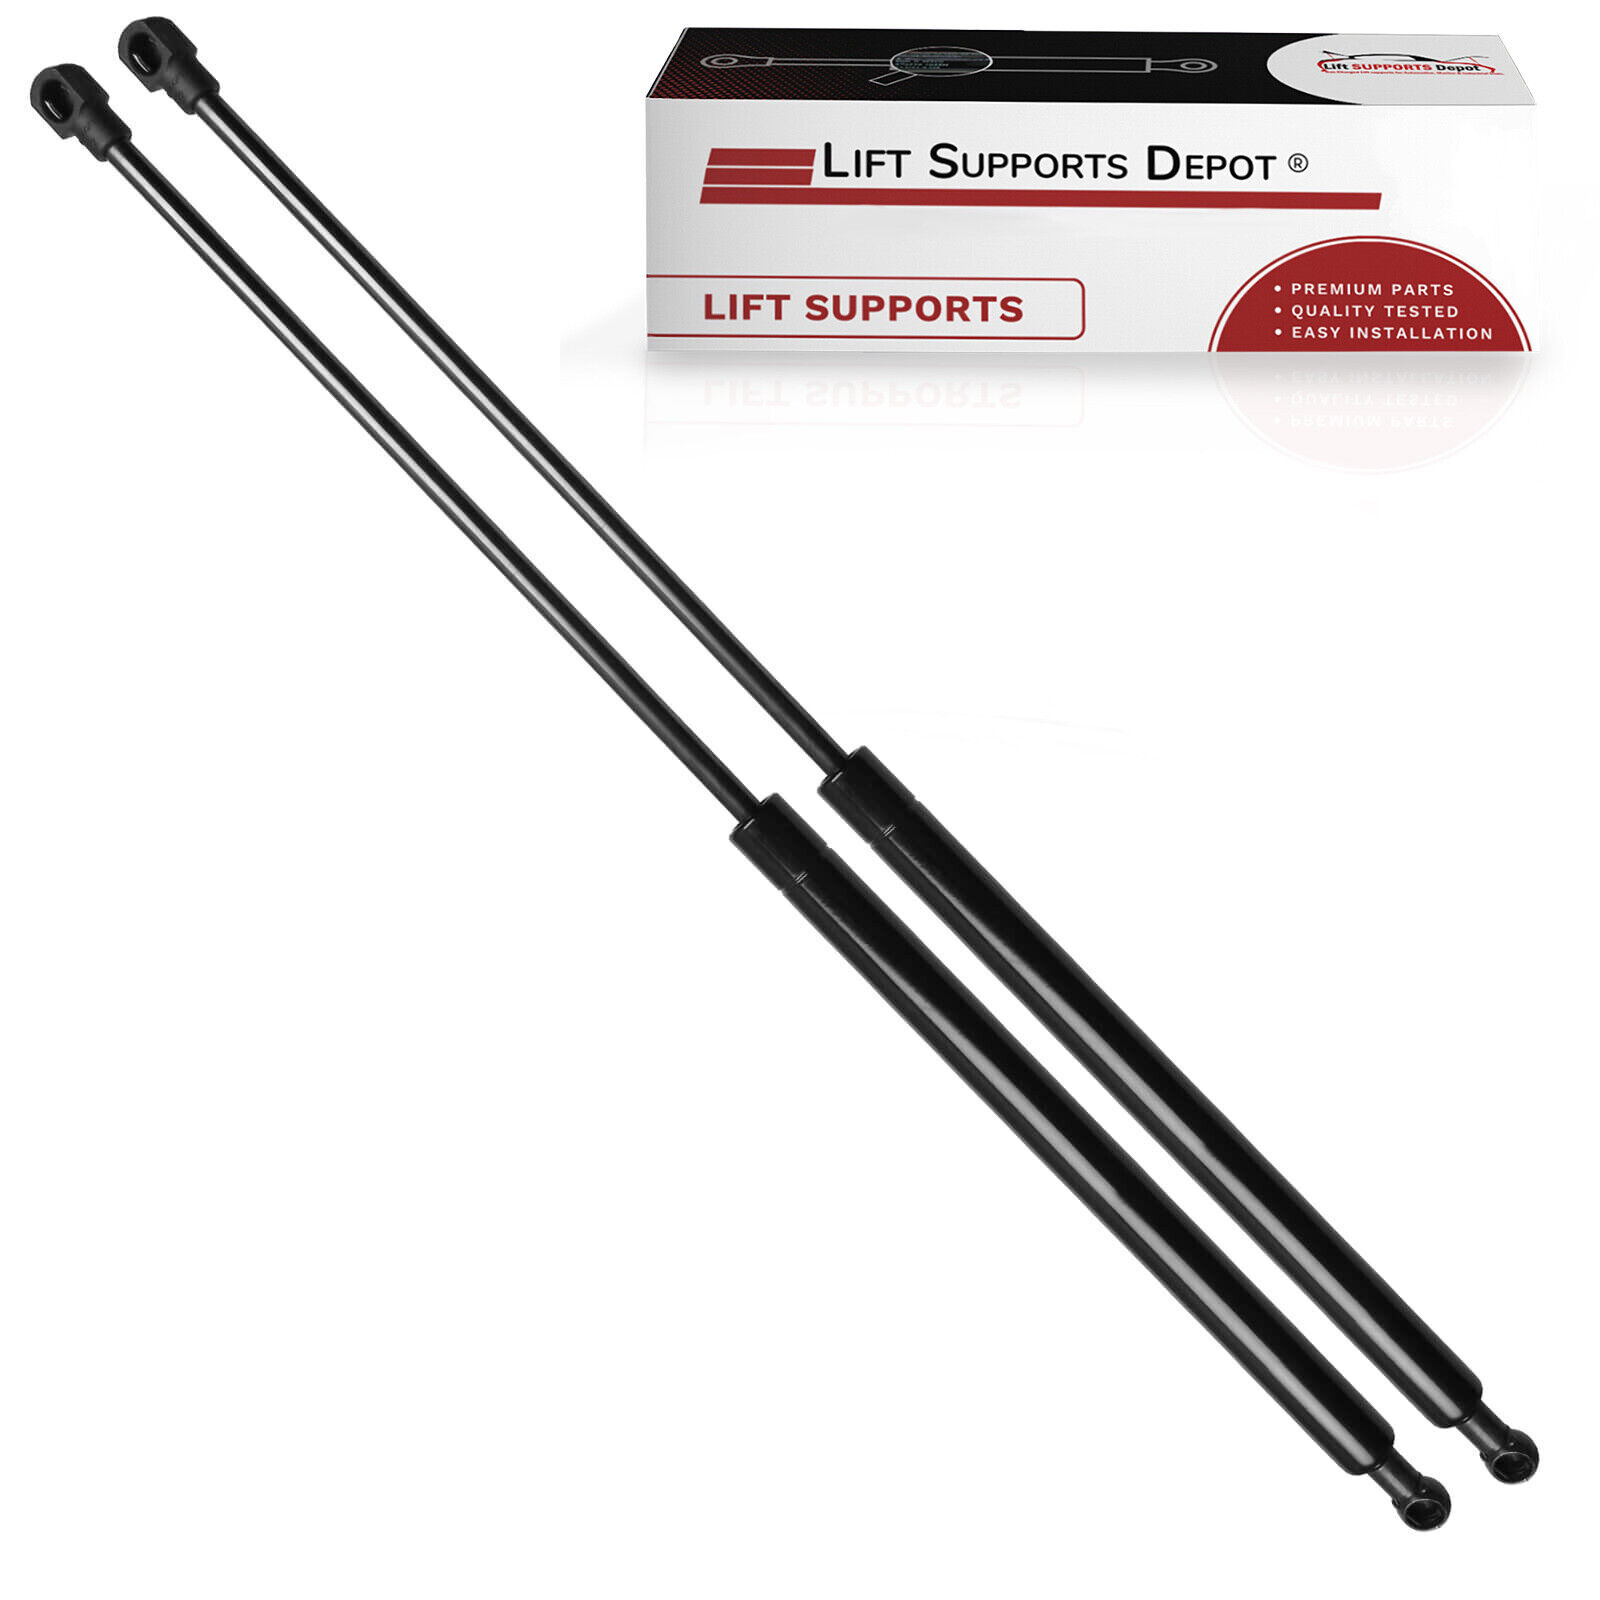 Qty 2 Fits Lexus GX460 2014 to 2022 Front Hood Lift Supports Shocks